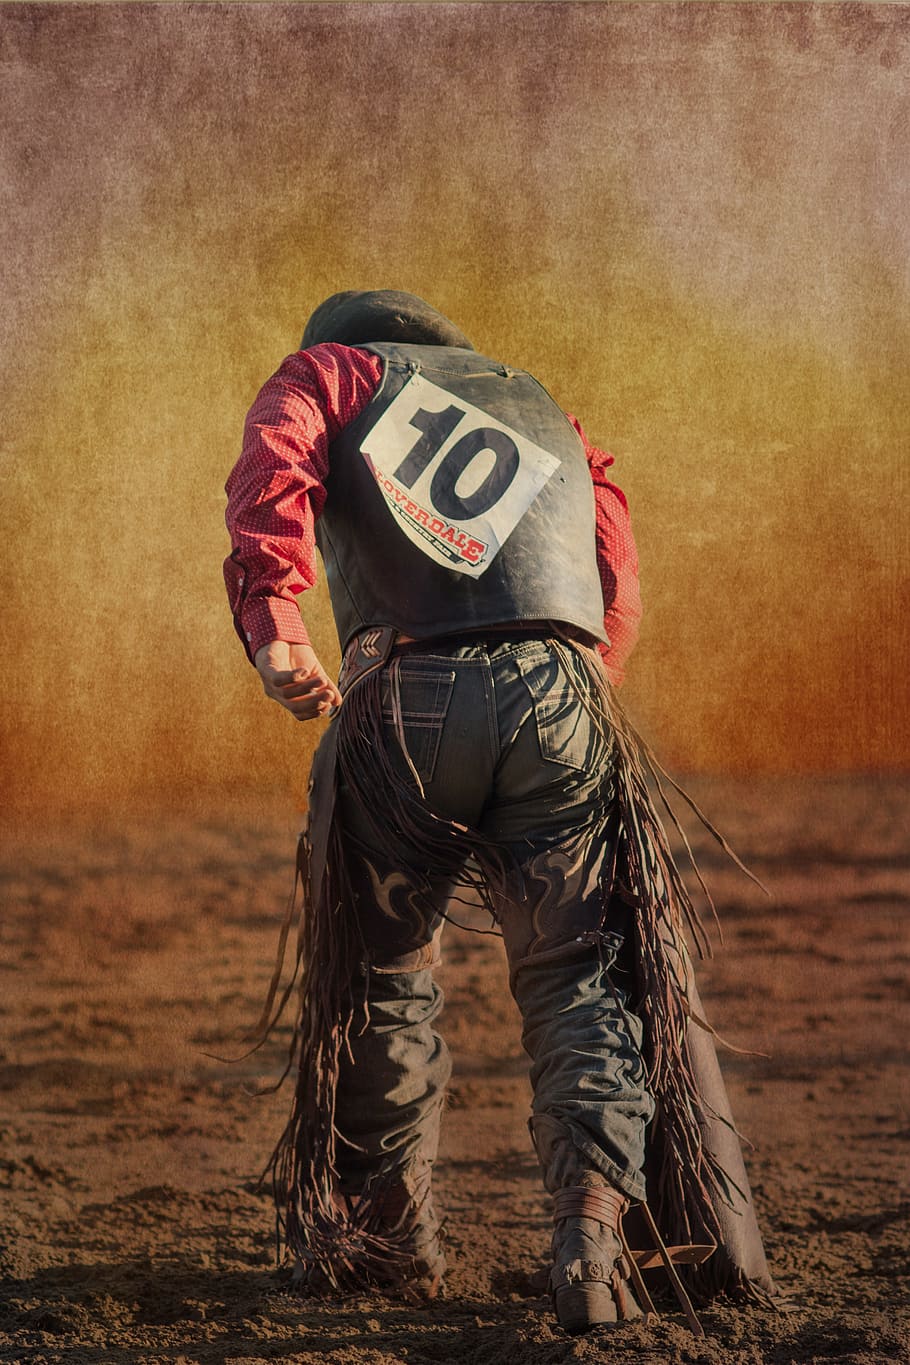 Rodeo, Cowboy, West, Wild, Country, wild, country, lasso, horse, rope, bucking